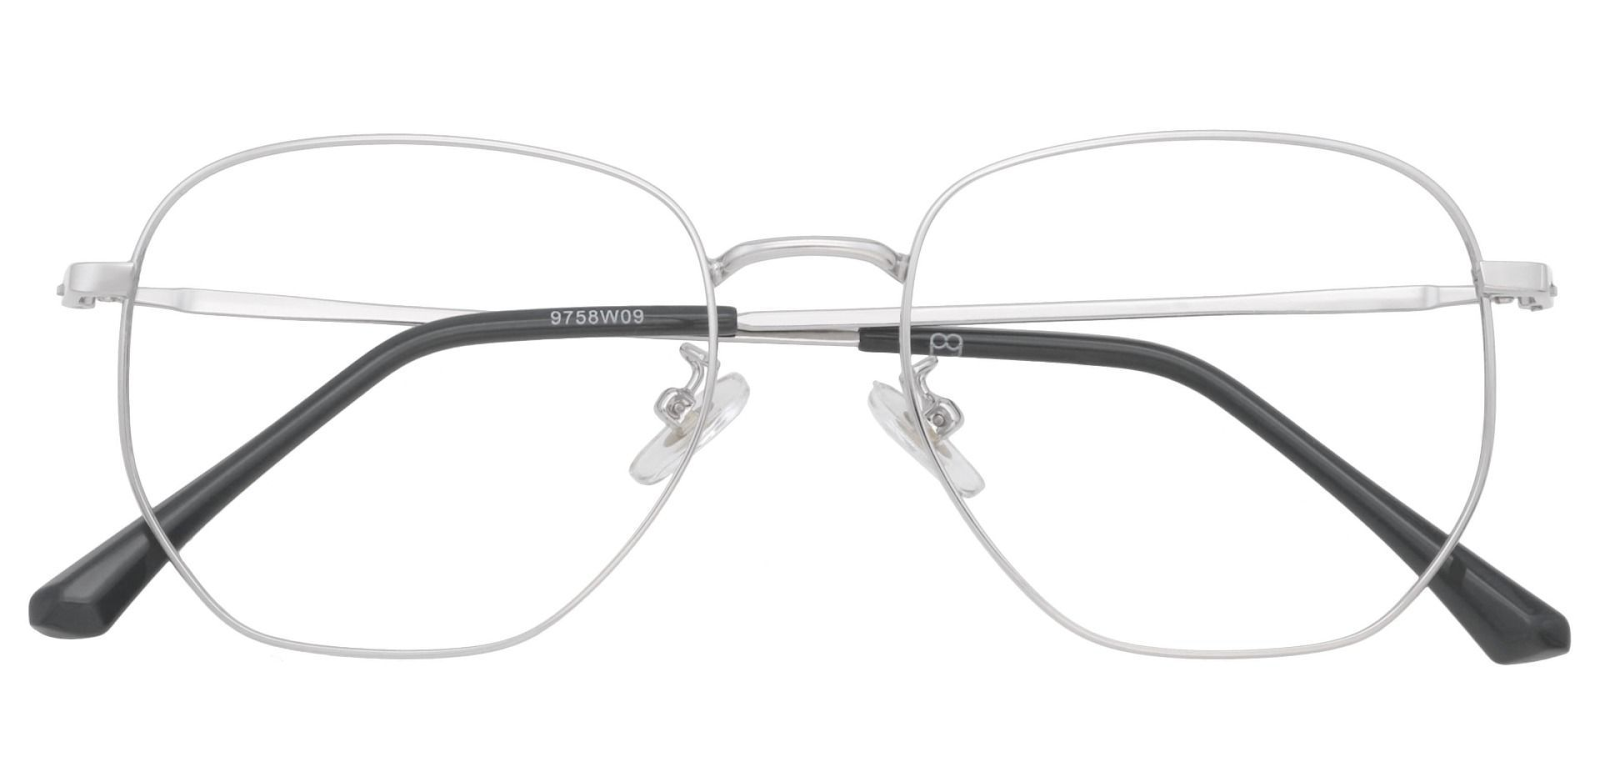 A pair of glasses with slightly hexagonal-shaped frames.